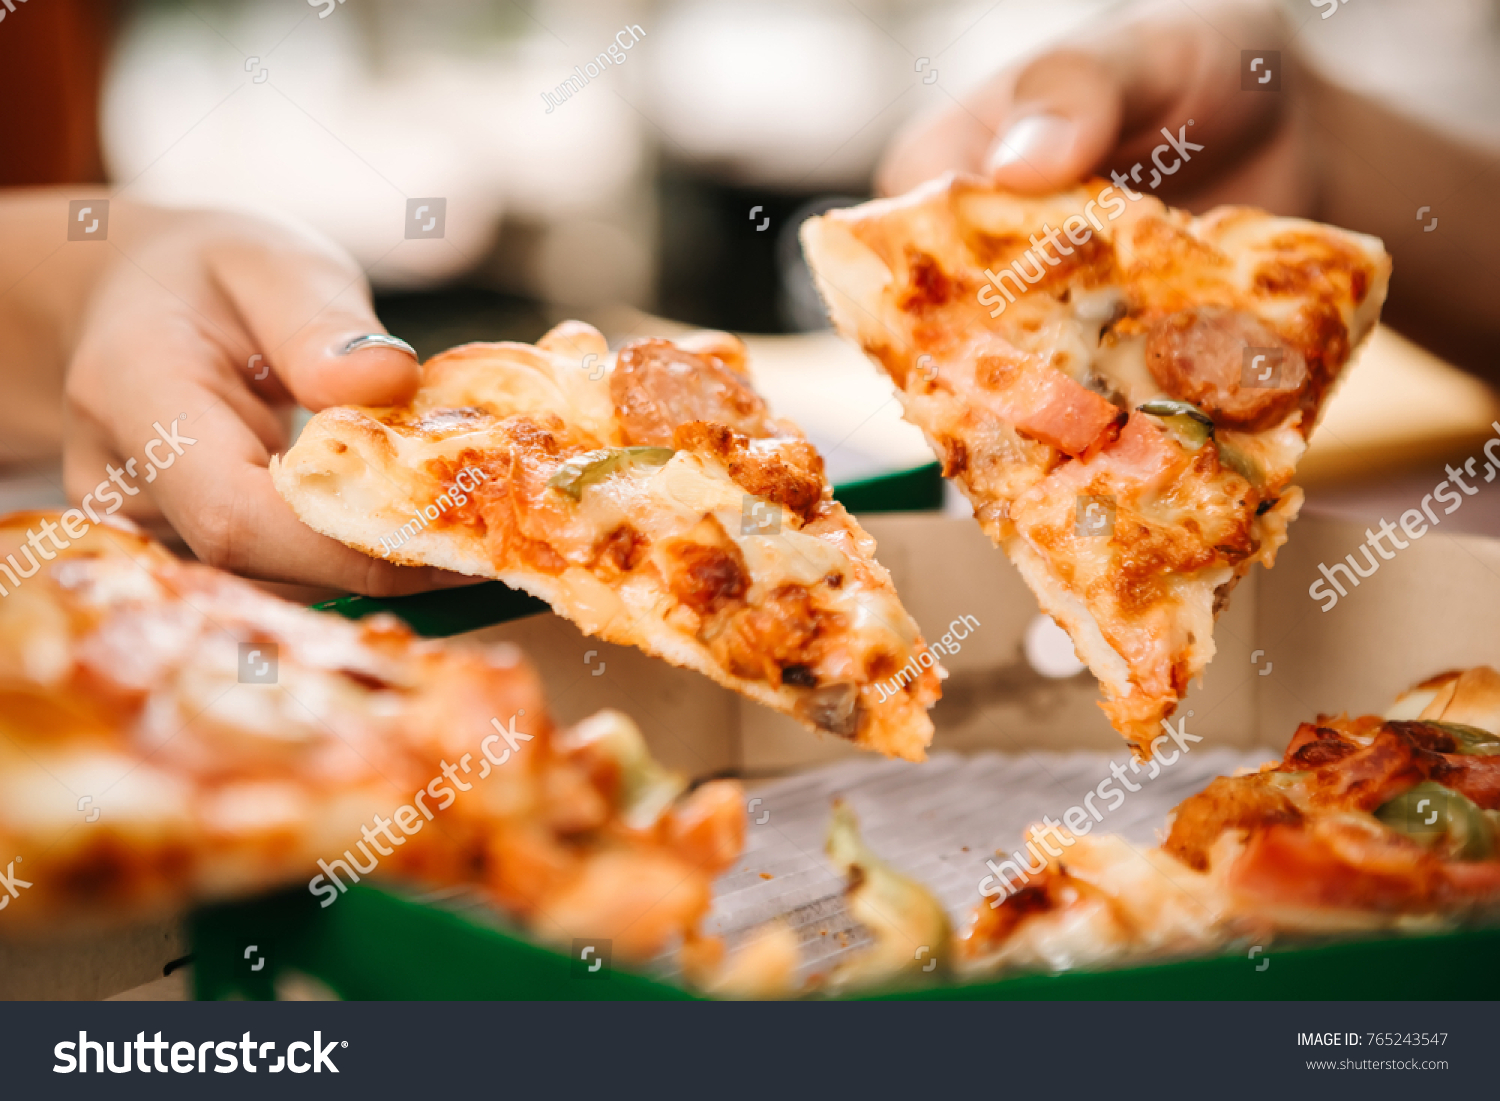 Asian students eating eating the pizza together in breaking time early next study class having fun and enjoy party, Italian food slice with cheese delicious at university outdoor. #765243547